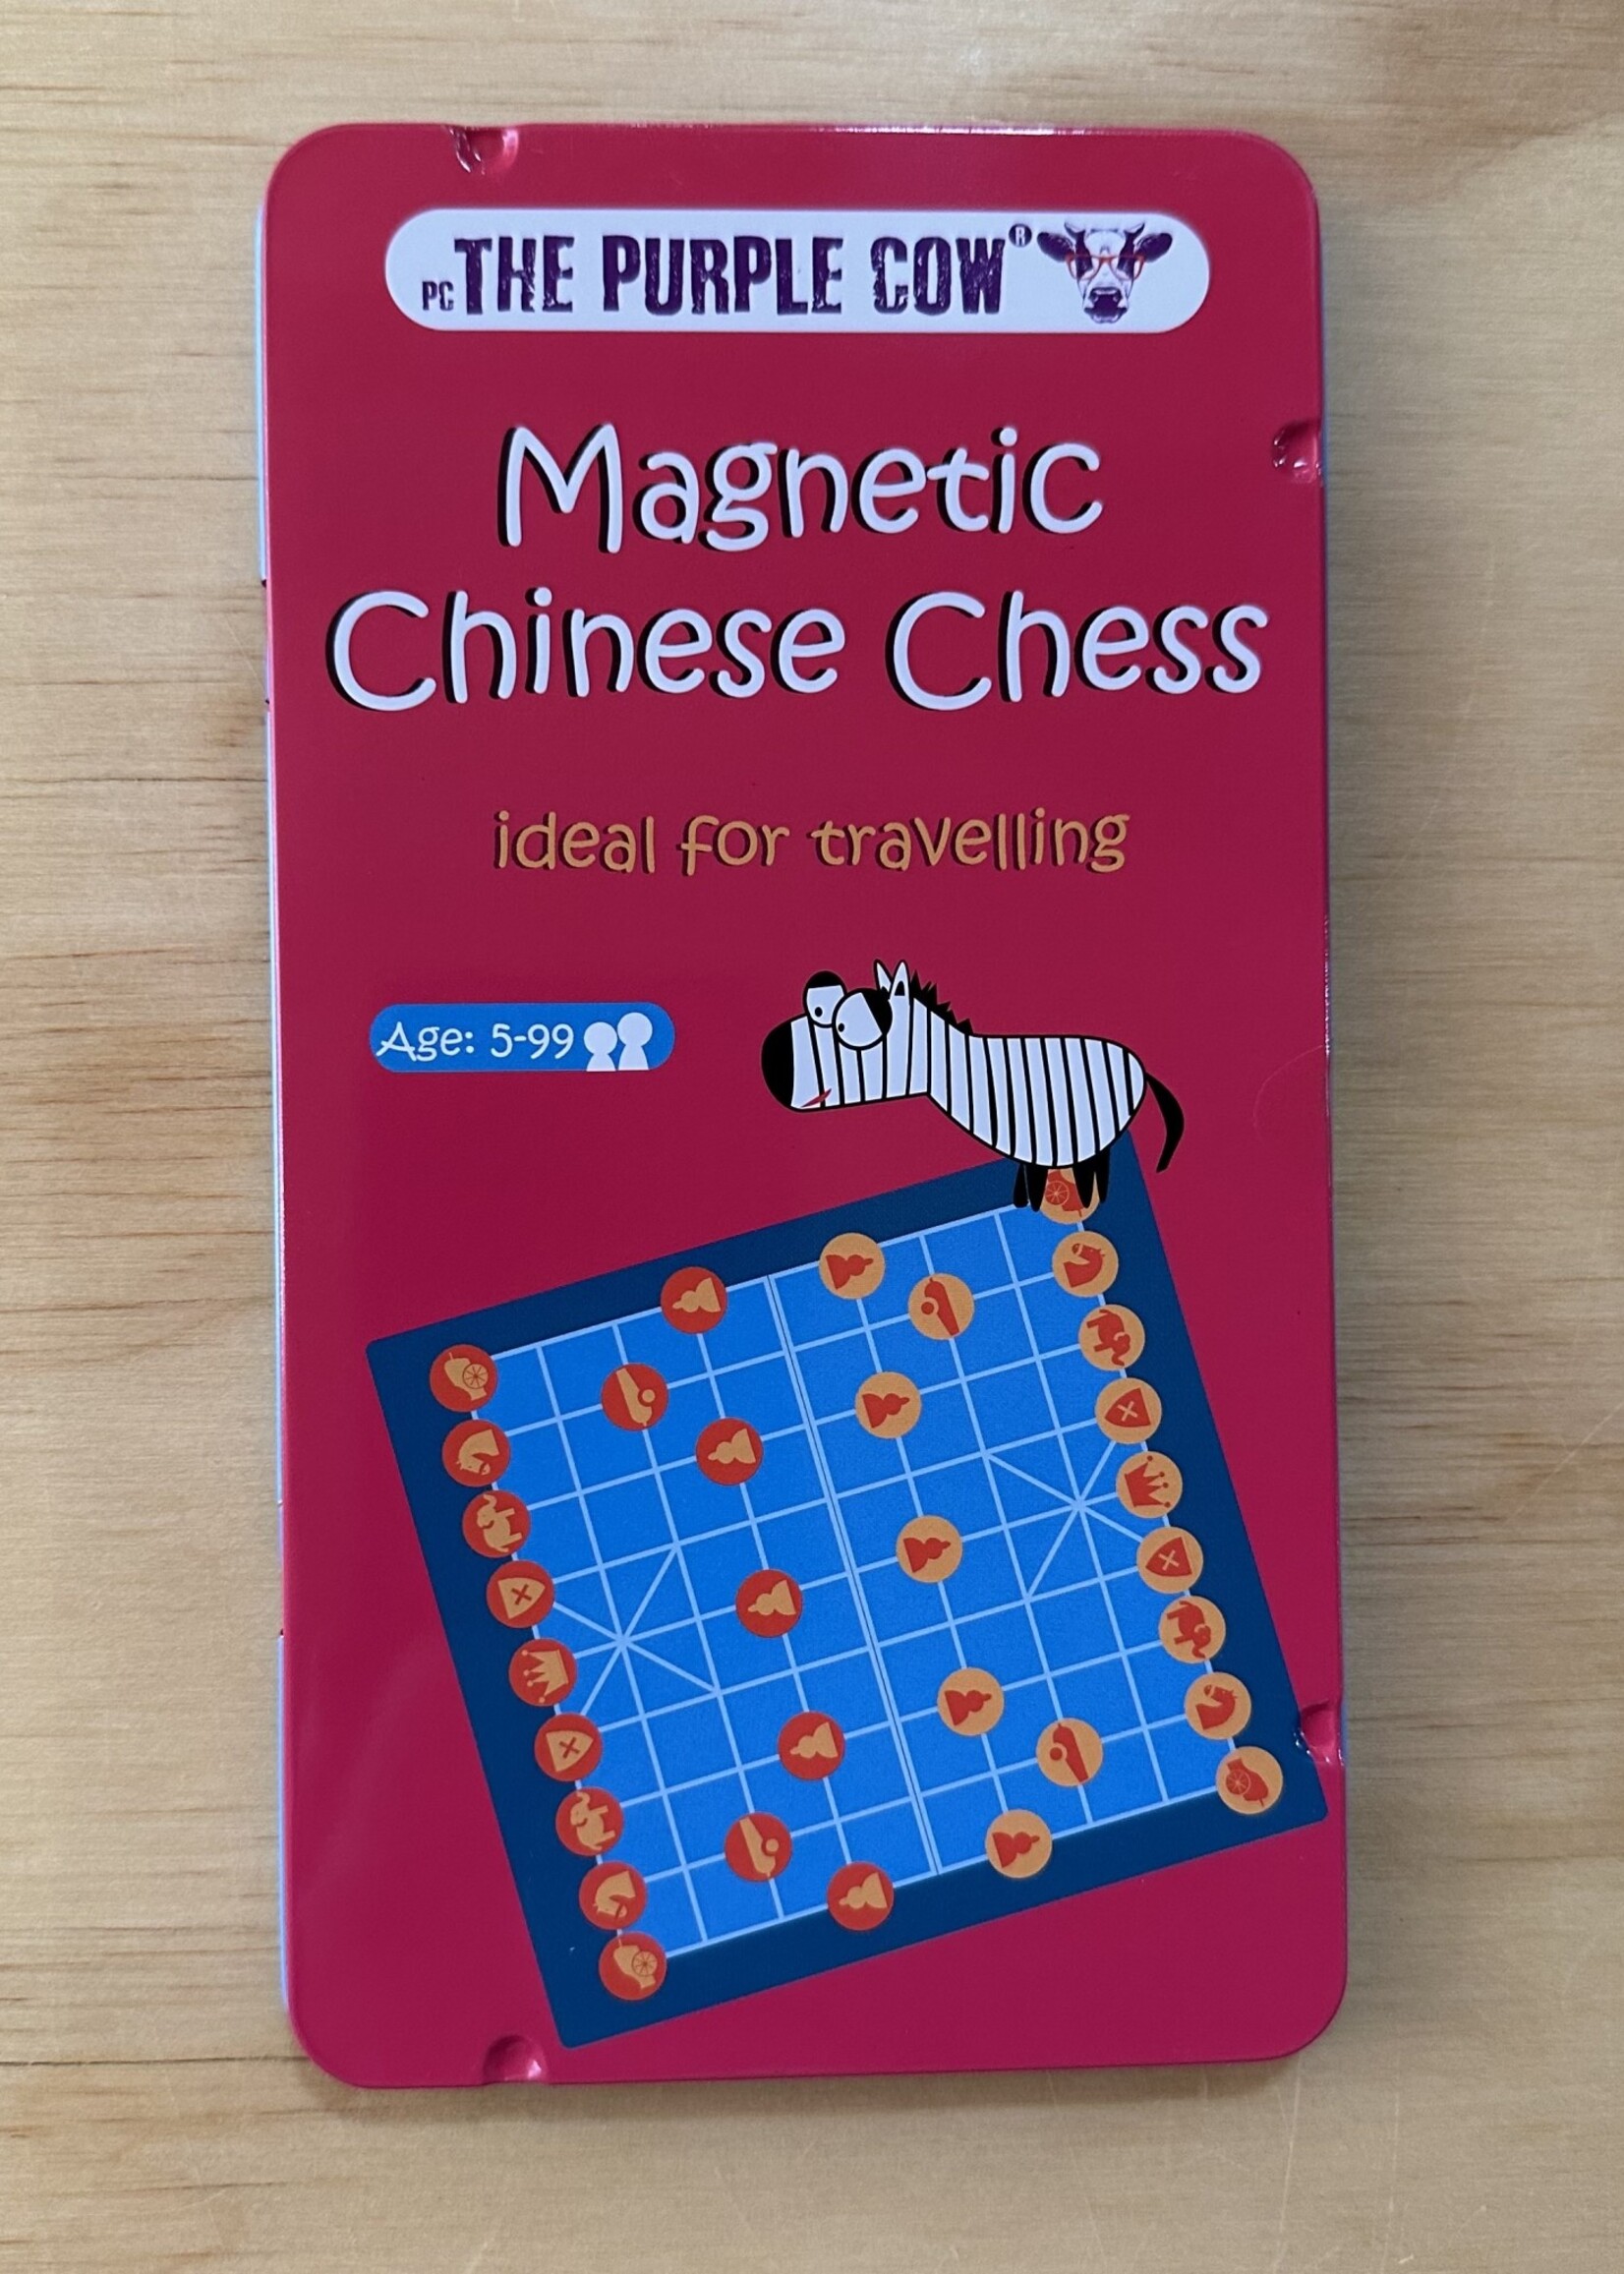 Travel Game - Magnetic Chinese Chess